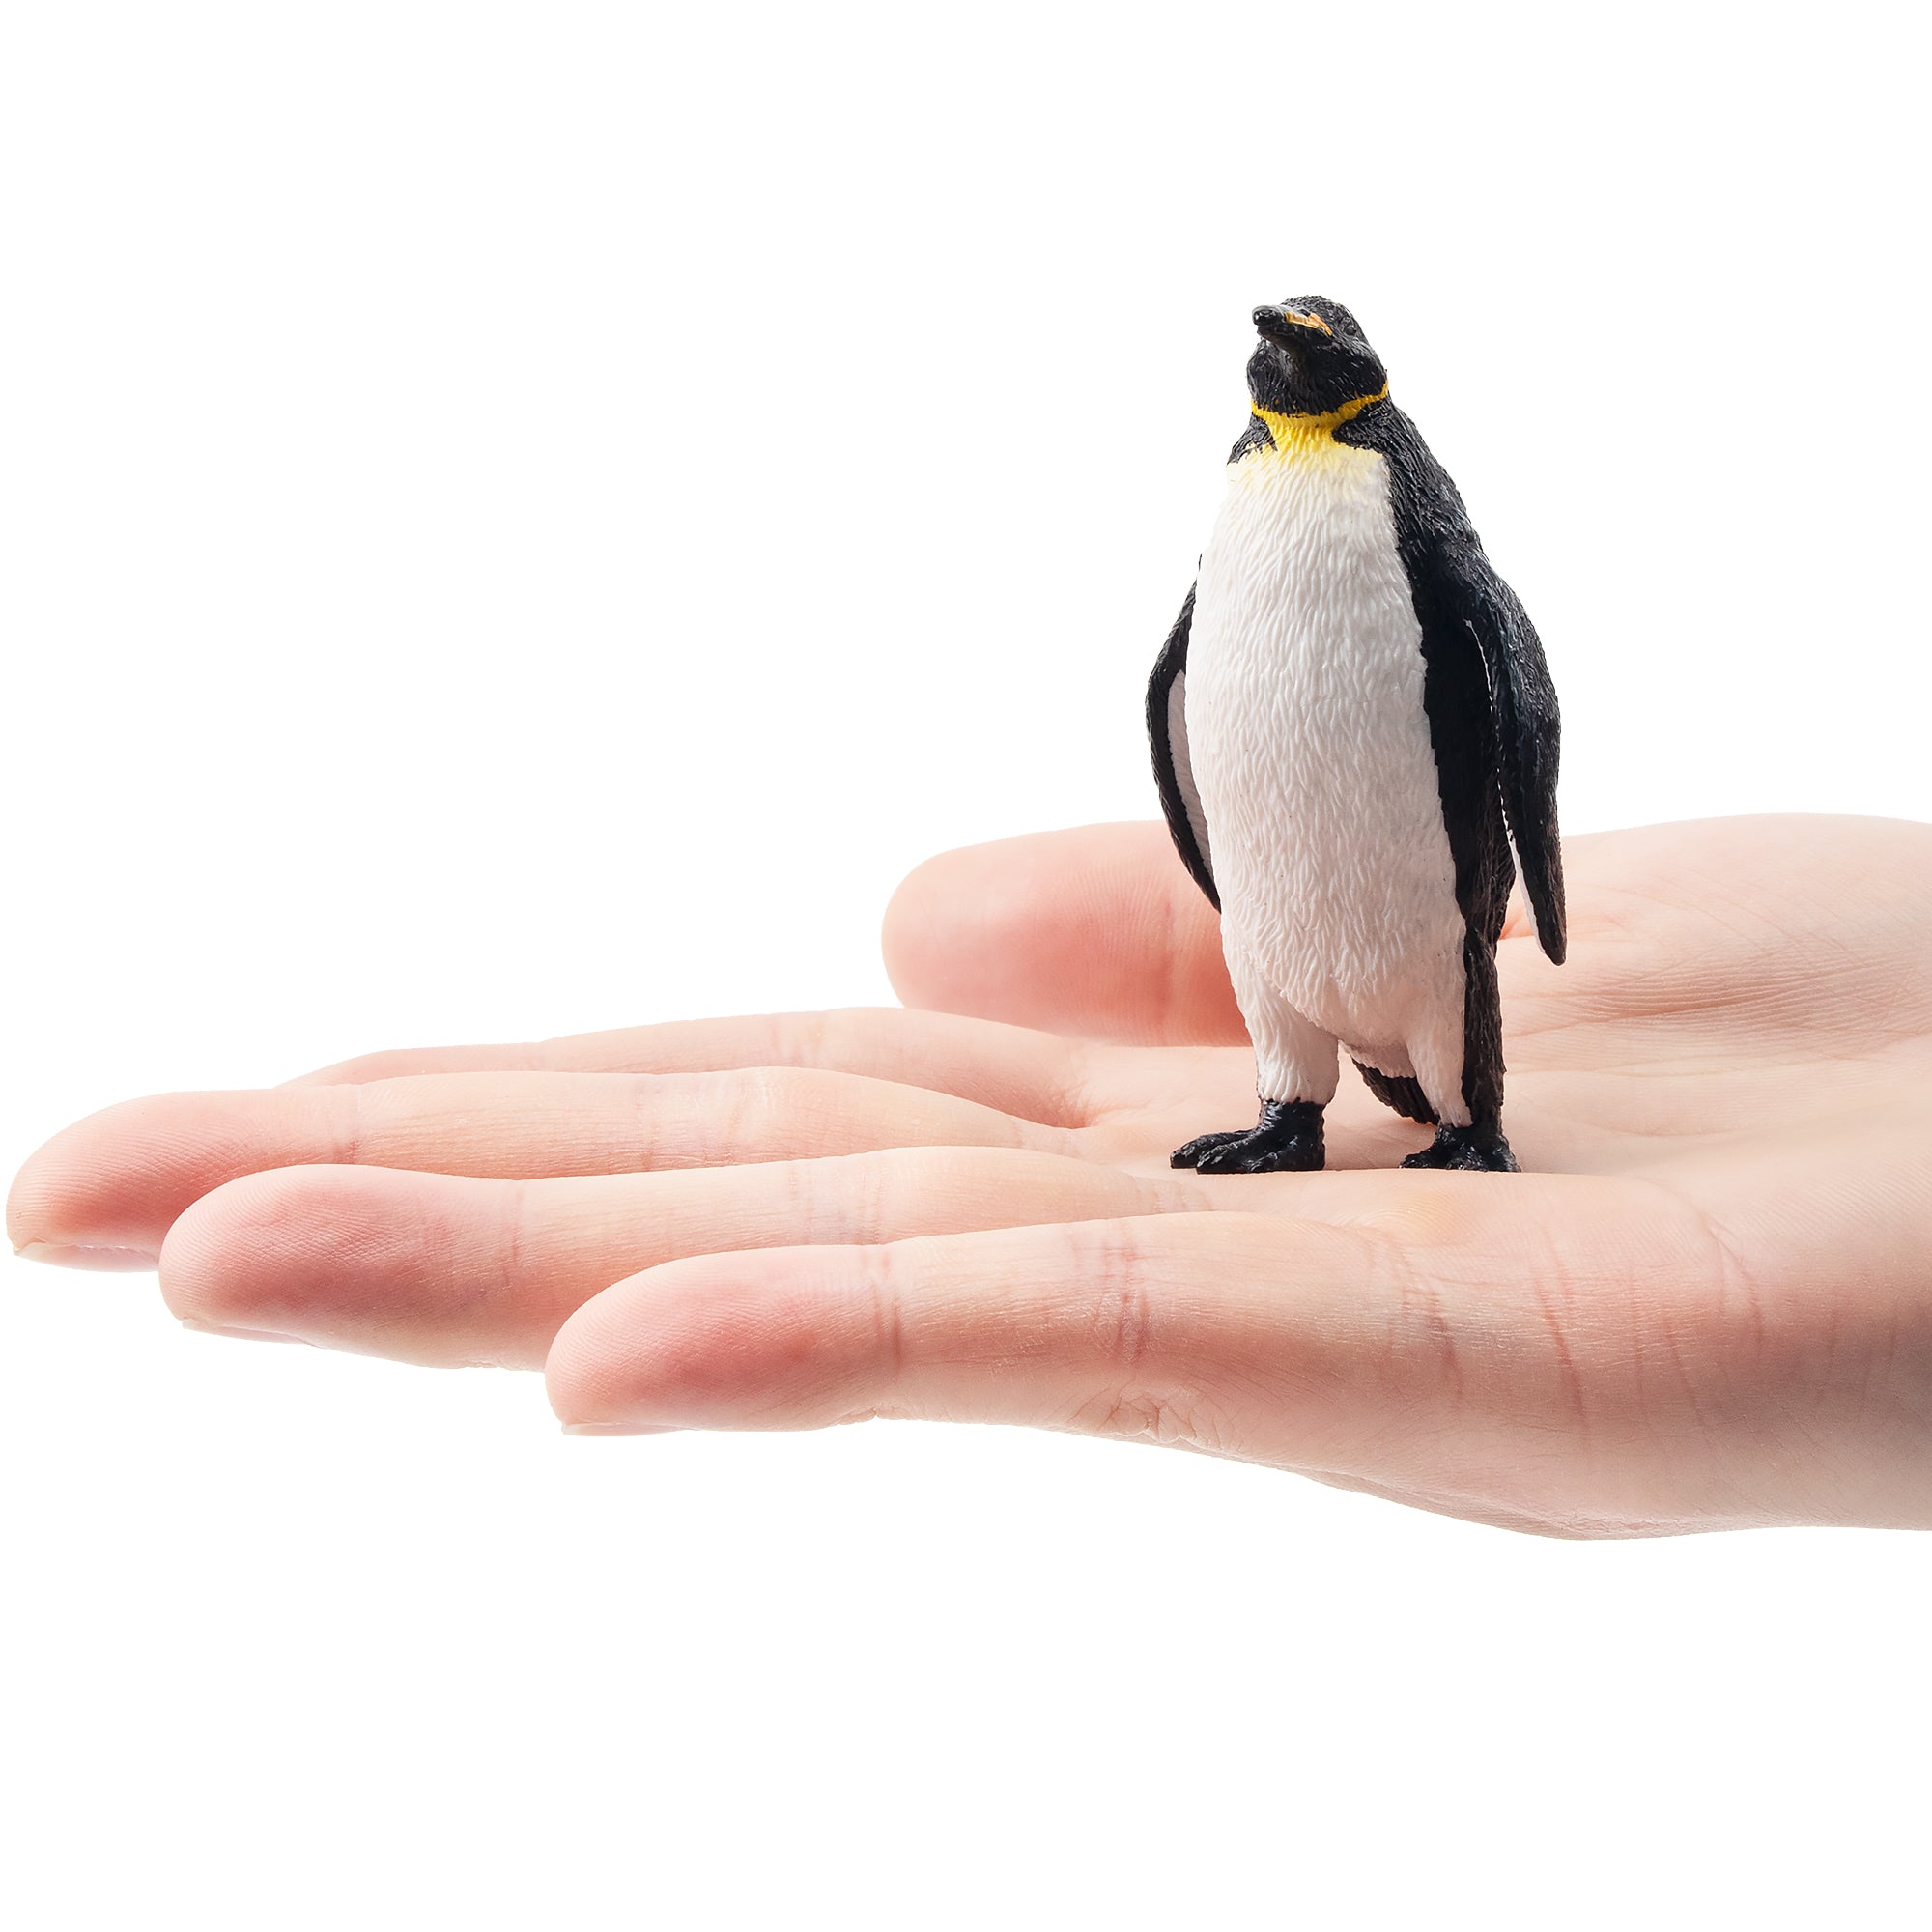 Toymany King Penguin Figurine Toy-on hand